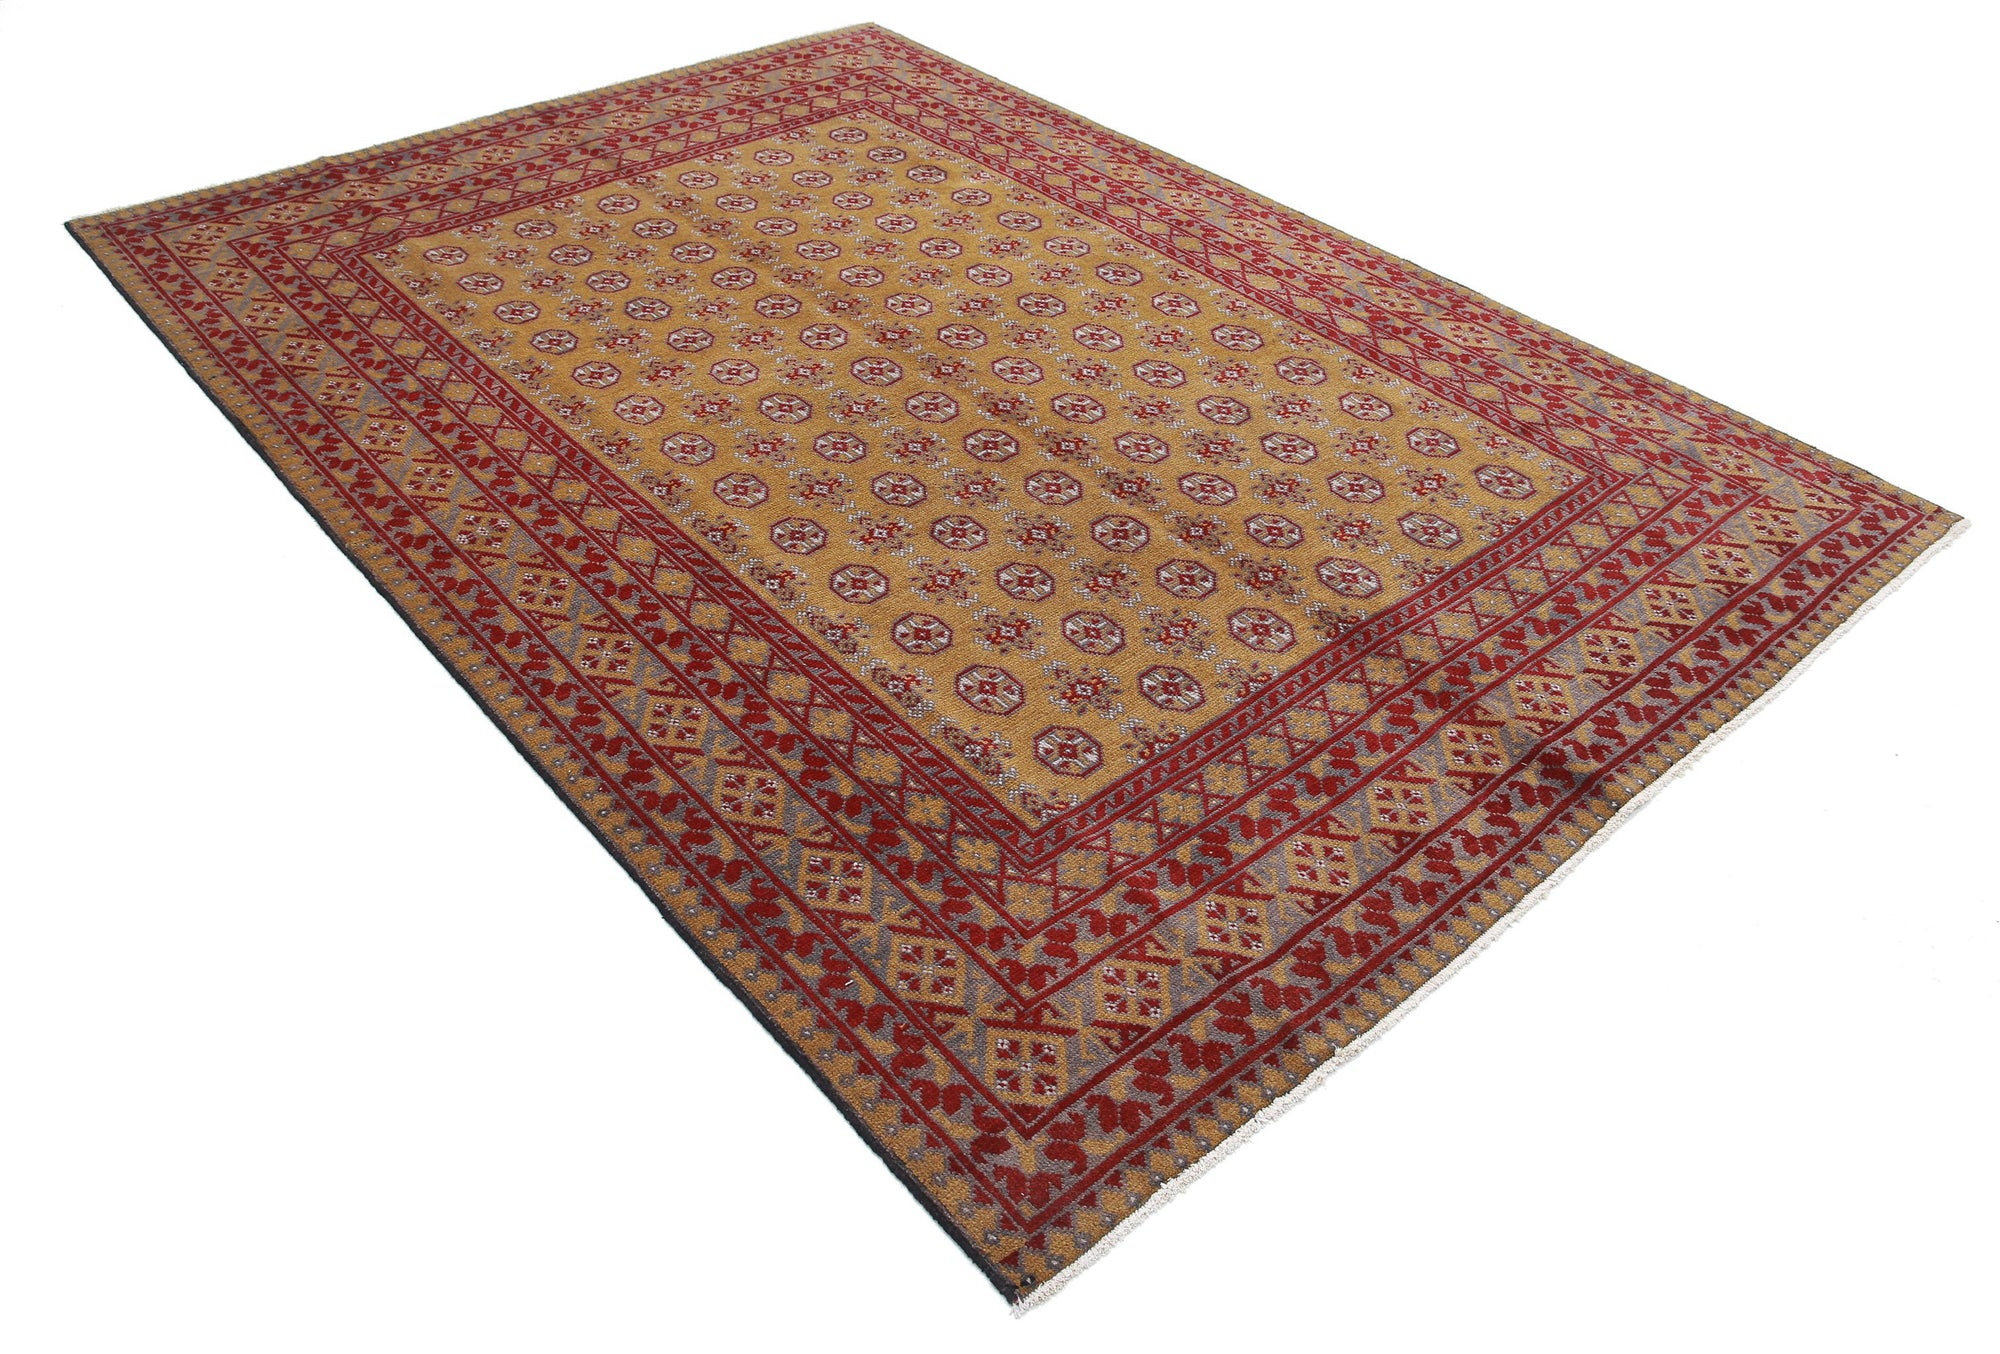 Revival-hand-knotted-gul-collection-wool-rug-5013974-1.jpg